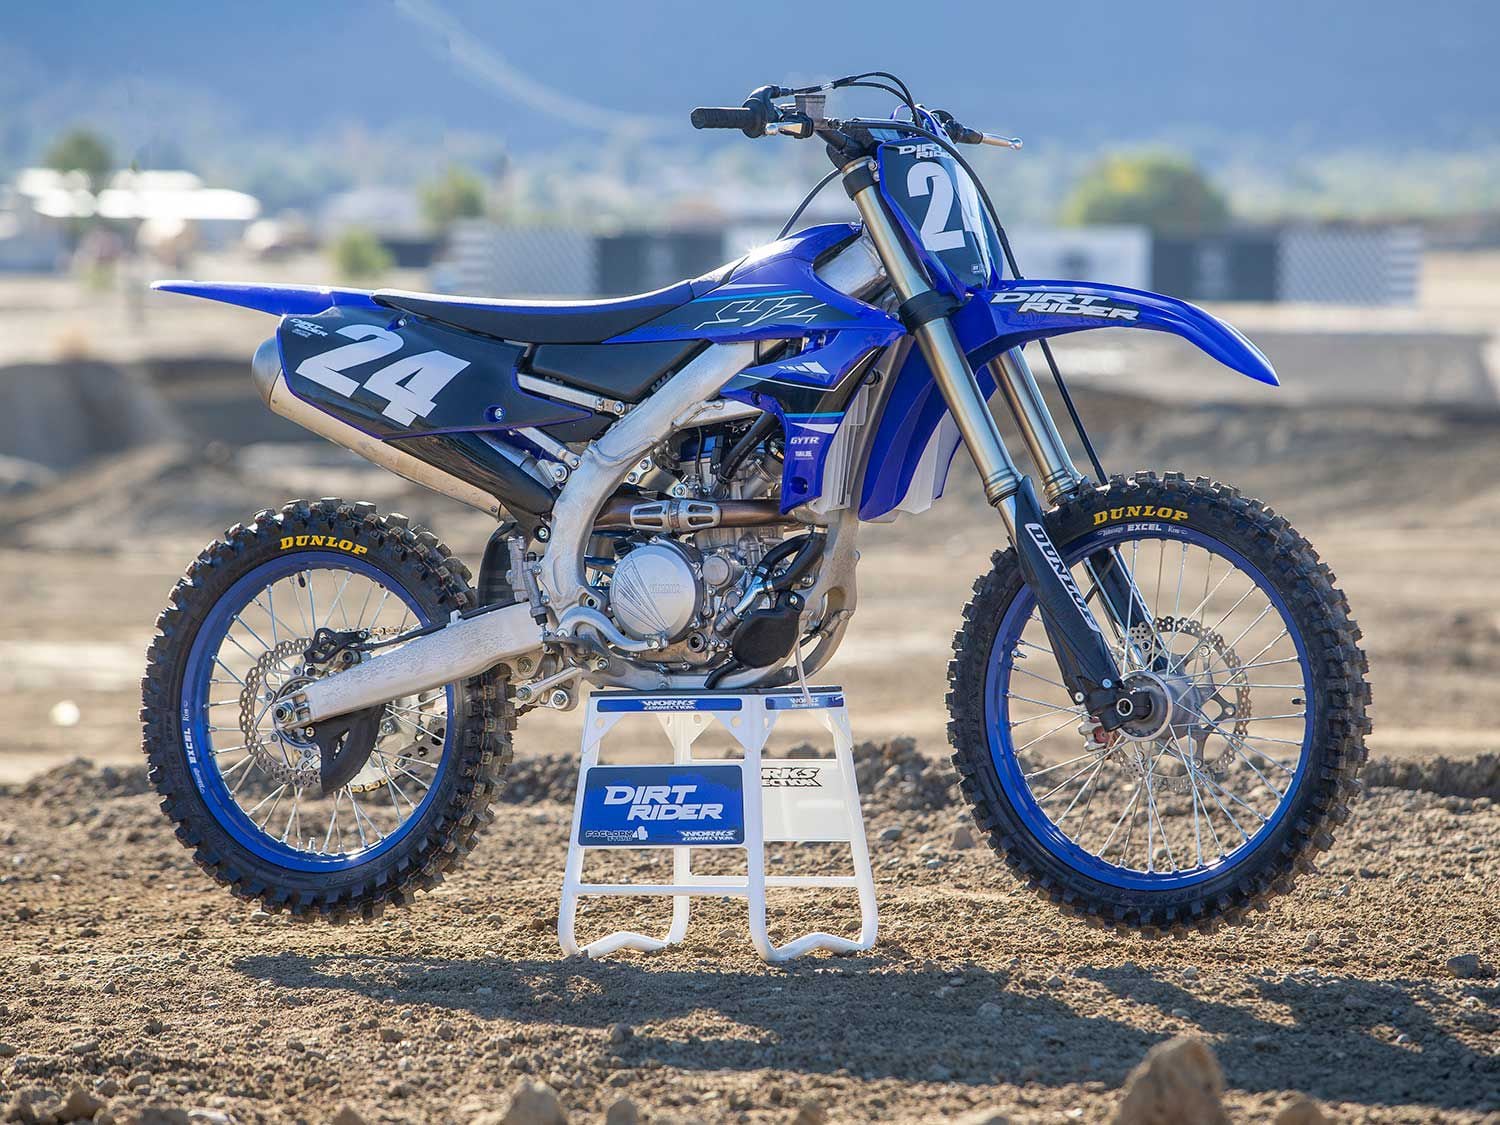 Although it looks fairly similar to last year’s model with the exception of the number plate and fork guard colors, the Yamaha YZ250F received some calculated refinements to its engine, suspension, and chassis for 2021.